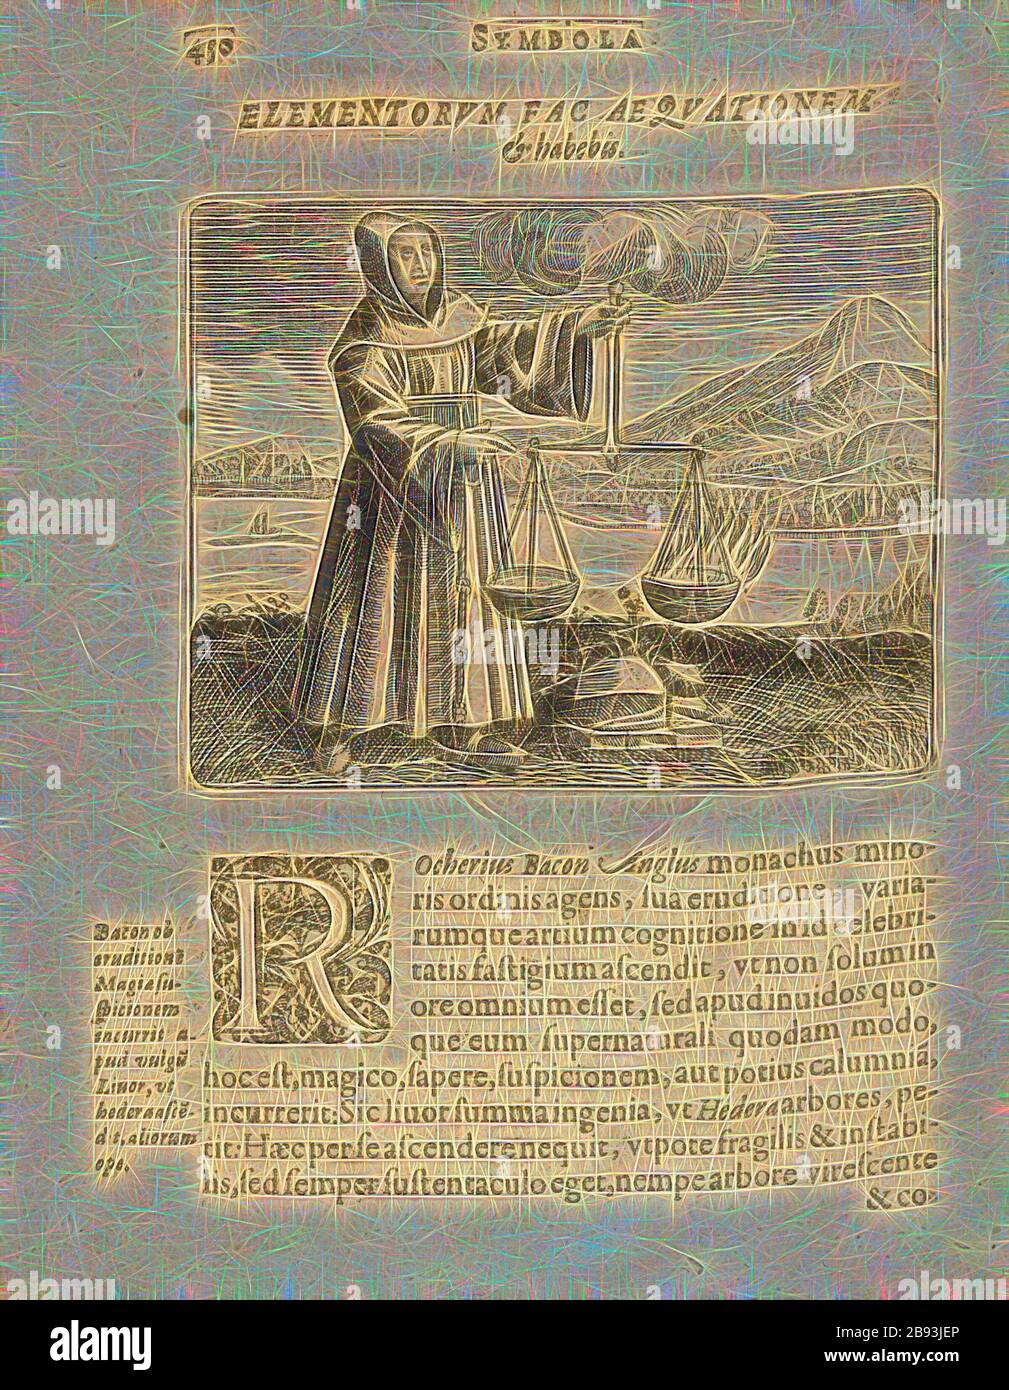 Roger Bacon, Illustration by Roger Bacon from the 17th century, Fig. 1, S 450, 1617, Michael Maier: Symbola aureae mensae duodecim nationum [...]. Francofurti: typis Antonii Hummii, impensis Lucae Iennis, [1617], Reimagined by Gibon, design of warm cheerful glowing of brightness and light rays radiance. Classic art reinvented with a modern twist. Photography inspired by futurism, embracing dynamic energy of modern technology, movement, speed and revolutionize culture. Stock Photo